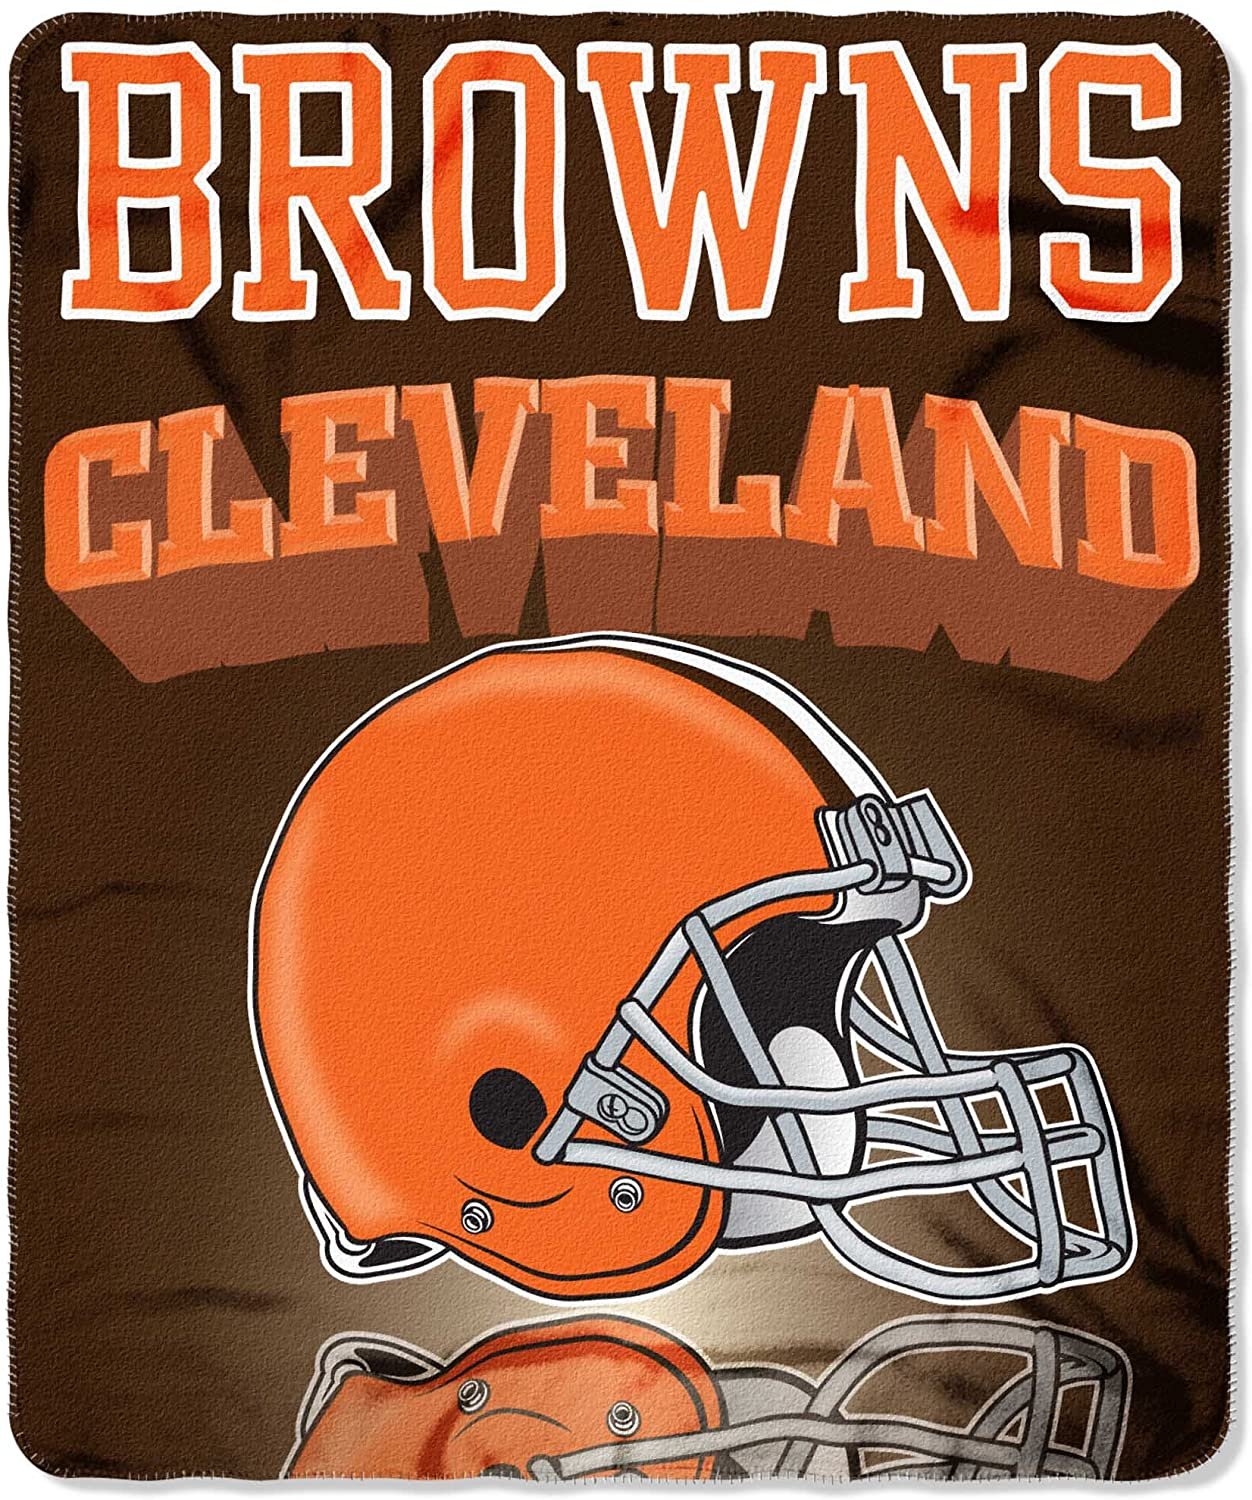 Cleveland Browns Gridiron Fleece Throw, 50-inches x 60-inches